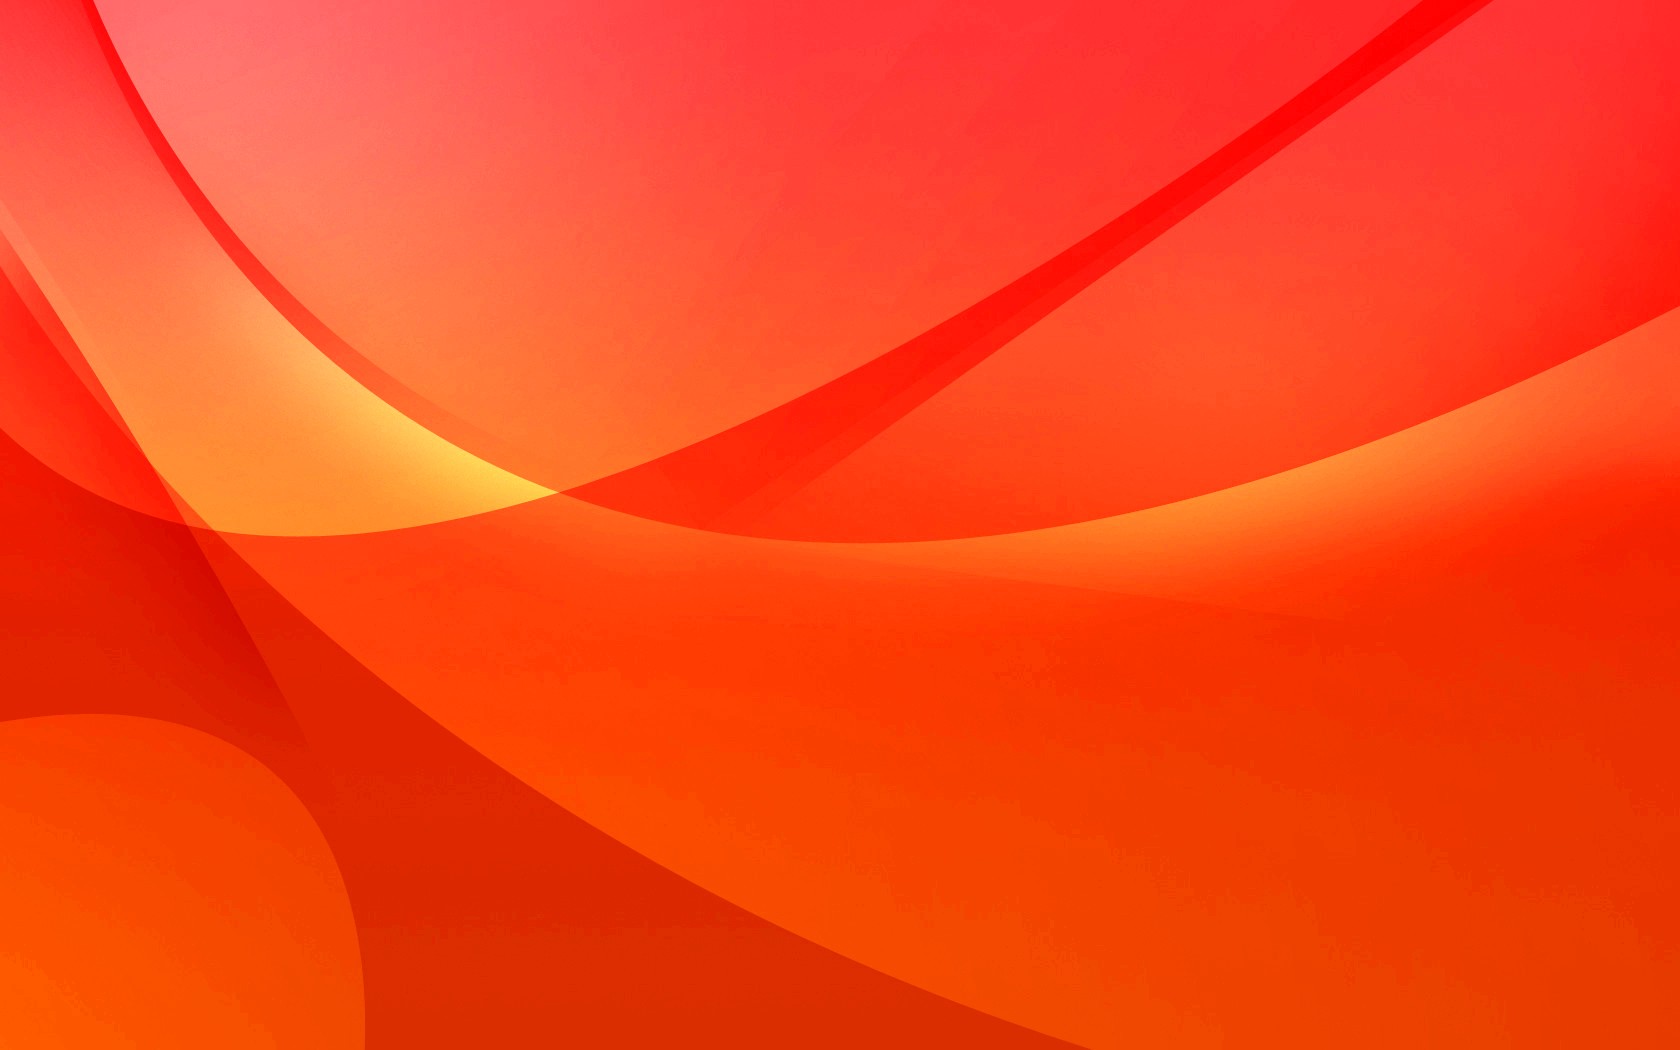 Red An Orange Gradient Abstract Wallpaper Free Images at Clker com vector clip art online 